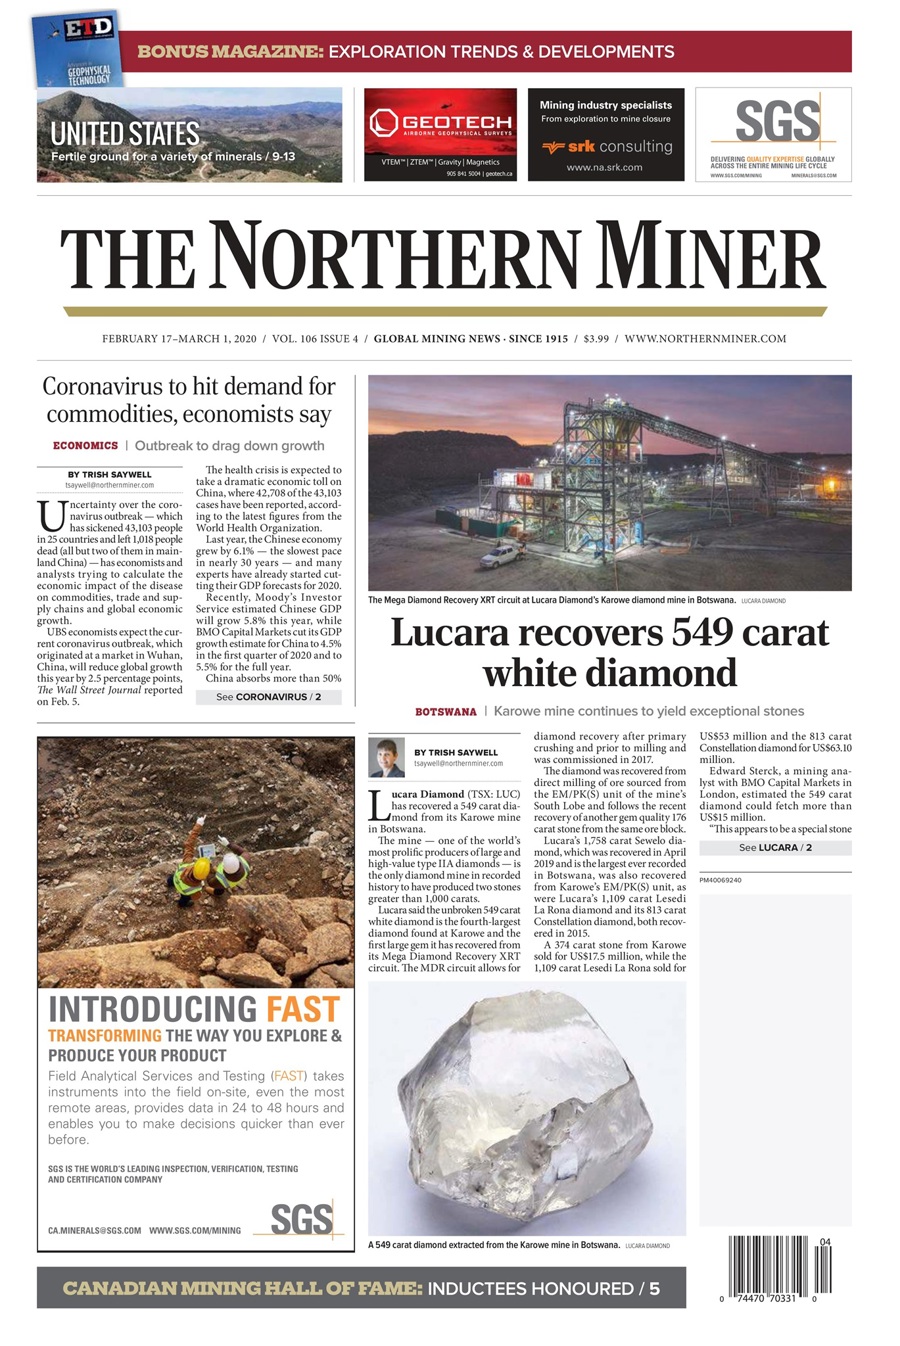 The Northern Miner Magazine - Vol. 106 No.4 Back Issue